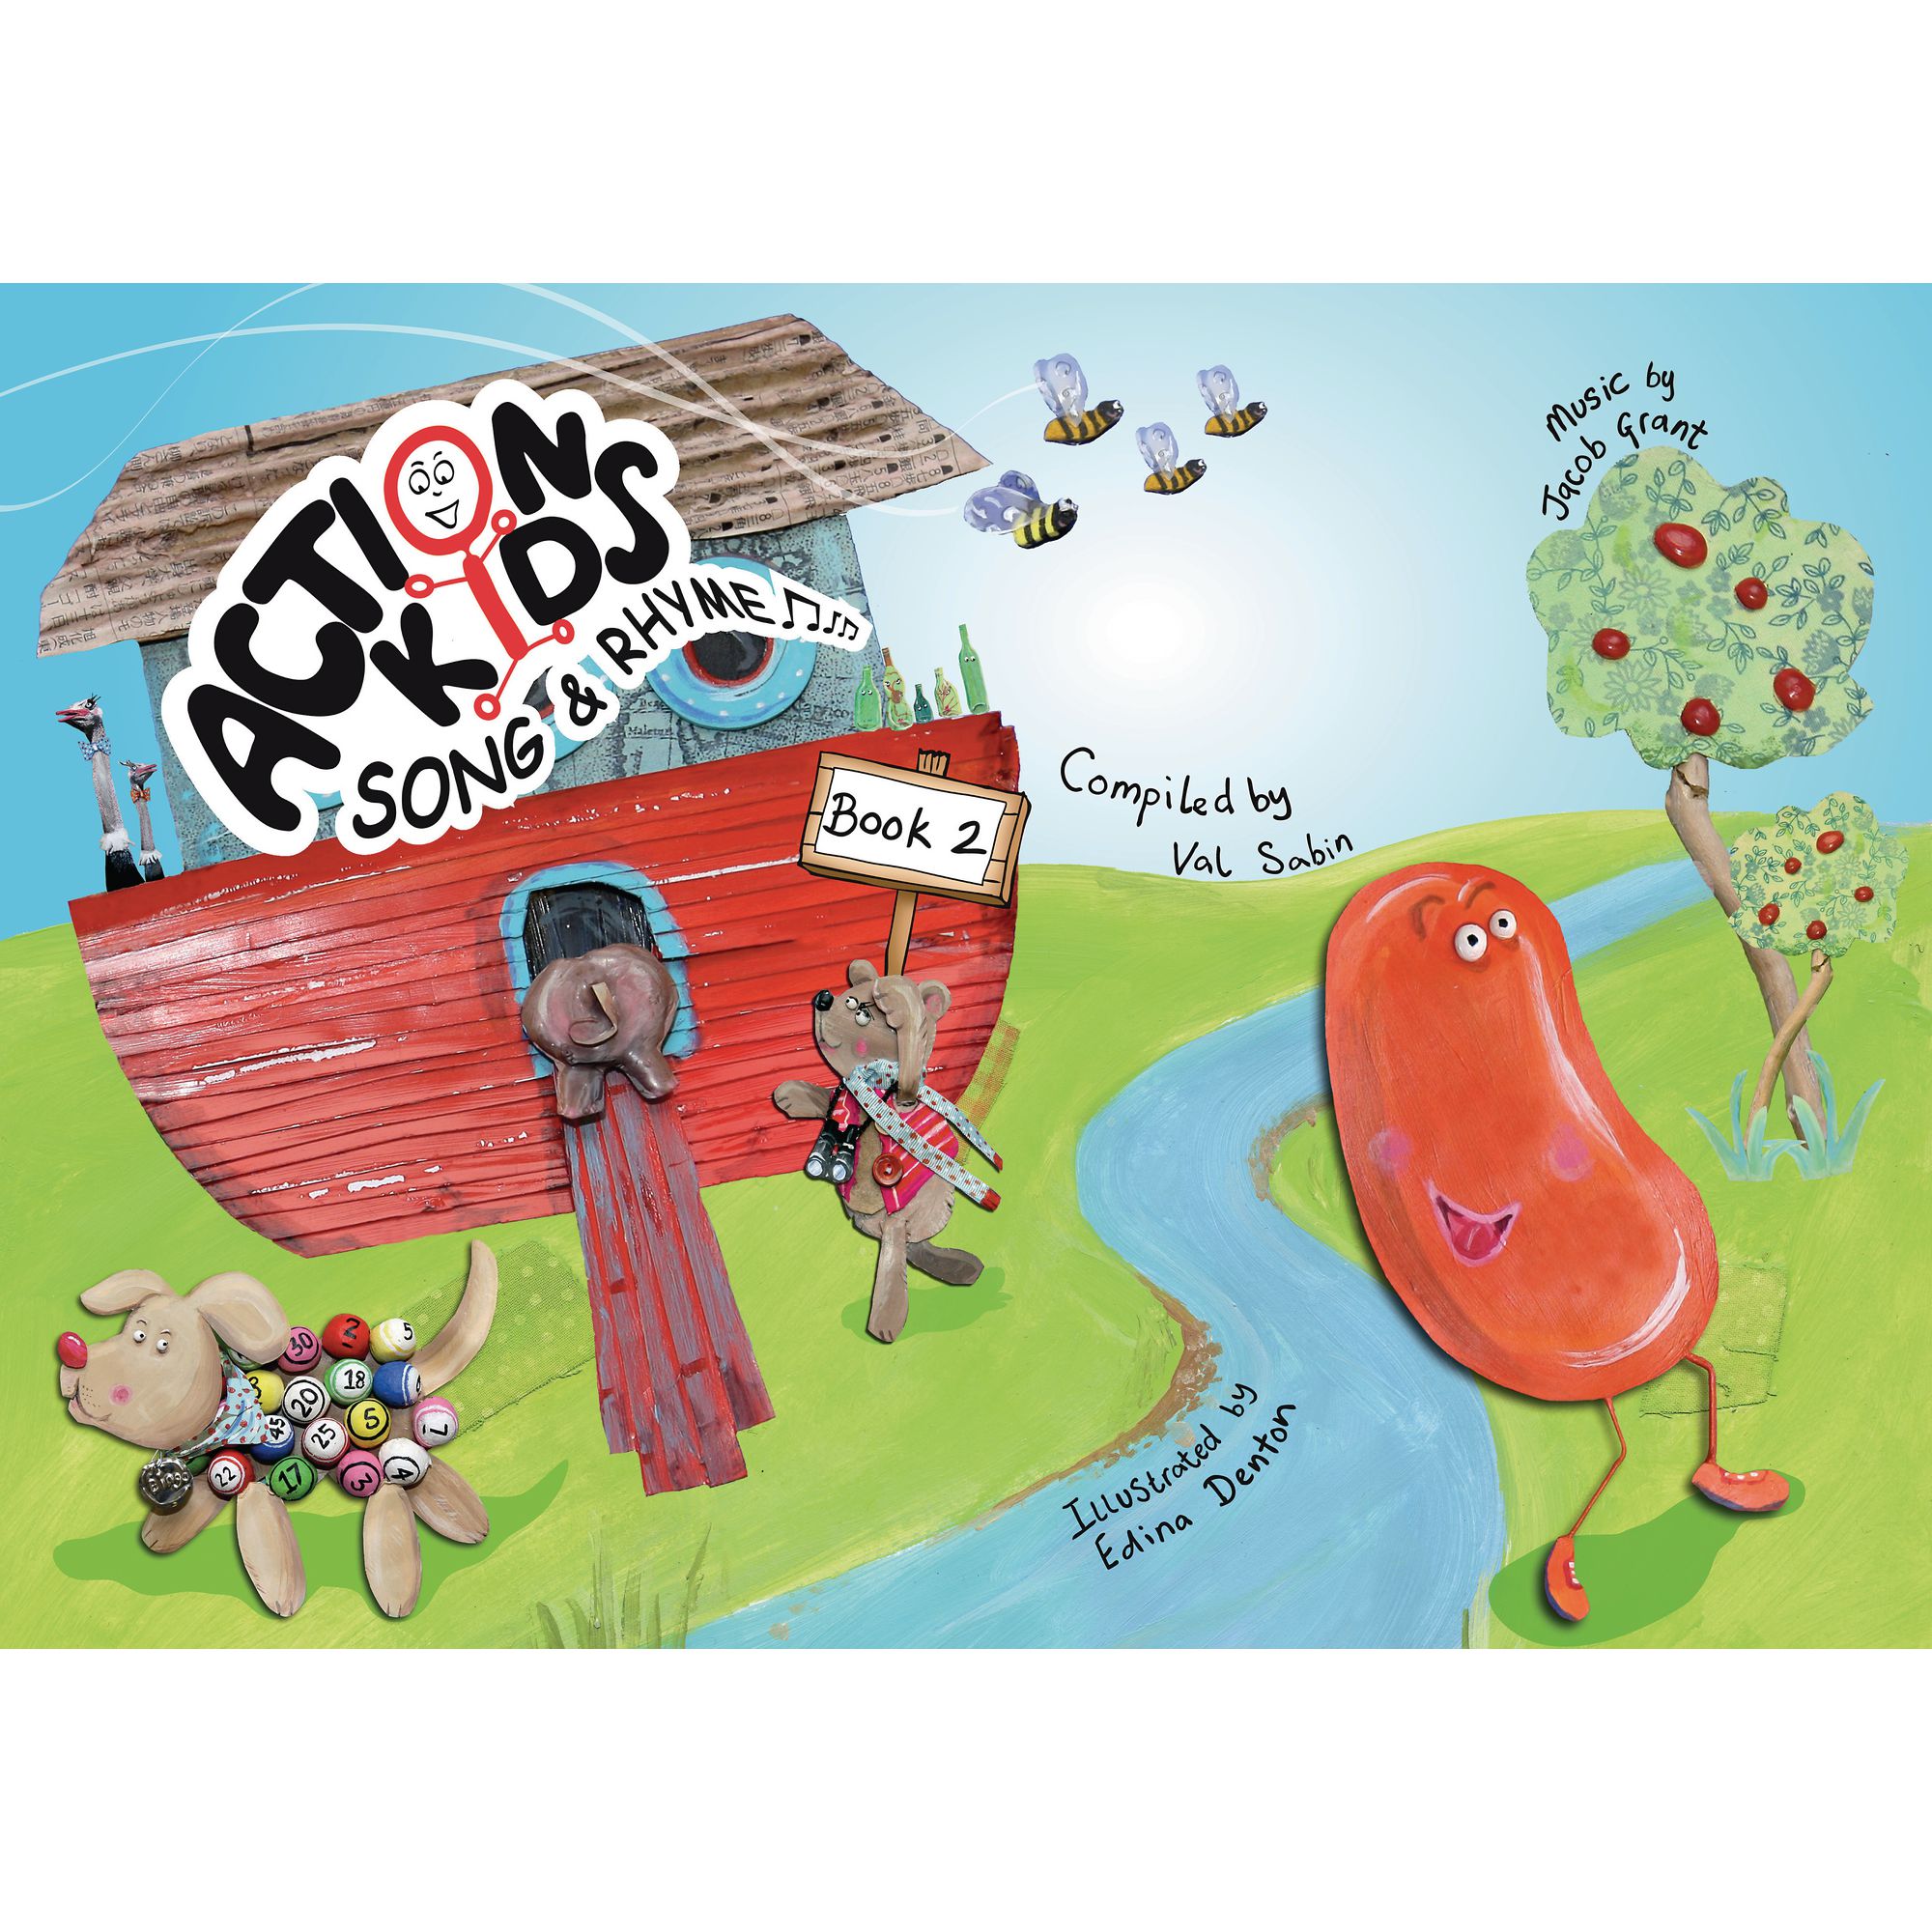 Action Kids Song Rhyme Book 2 Cd And Dvd